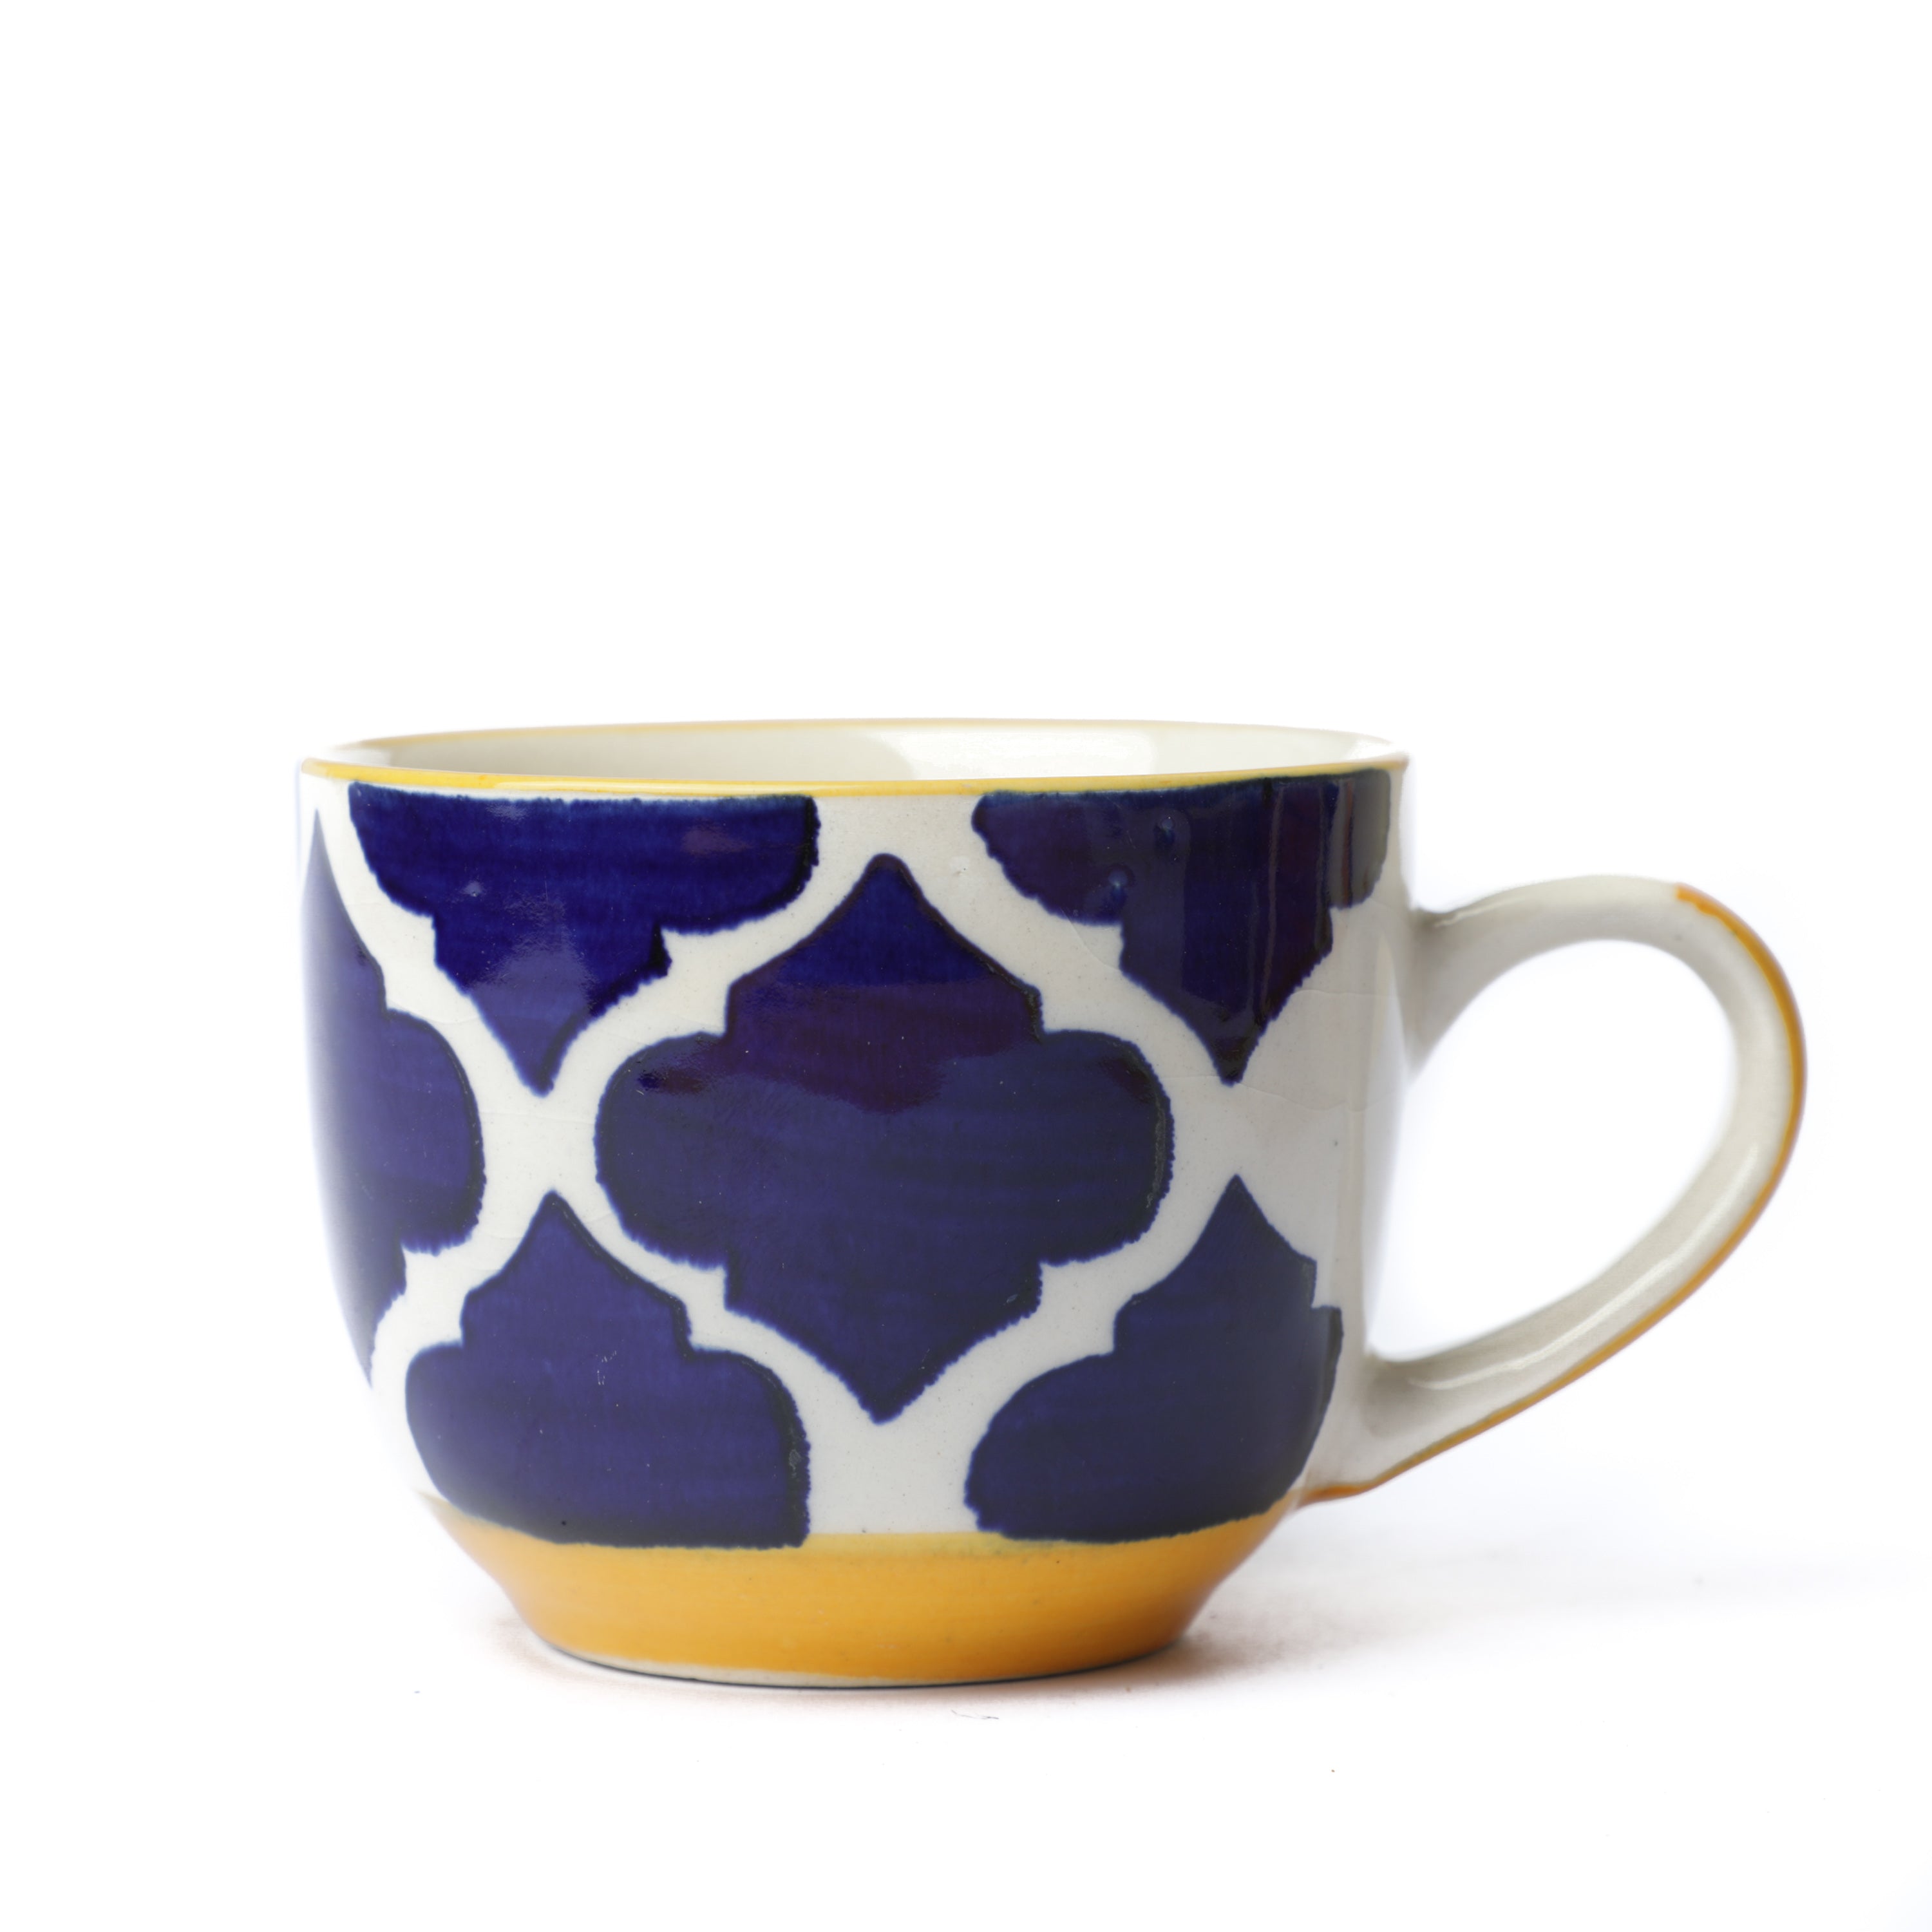 White Blue Ceramic Tea cups for return gifting and birthday gifting in the USA